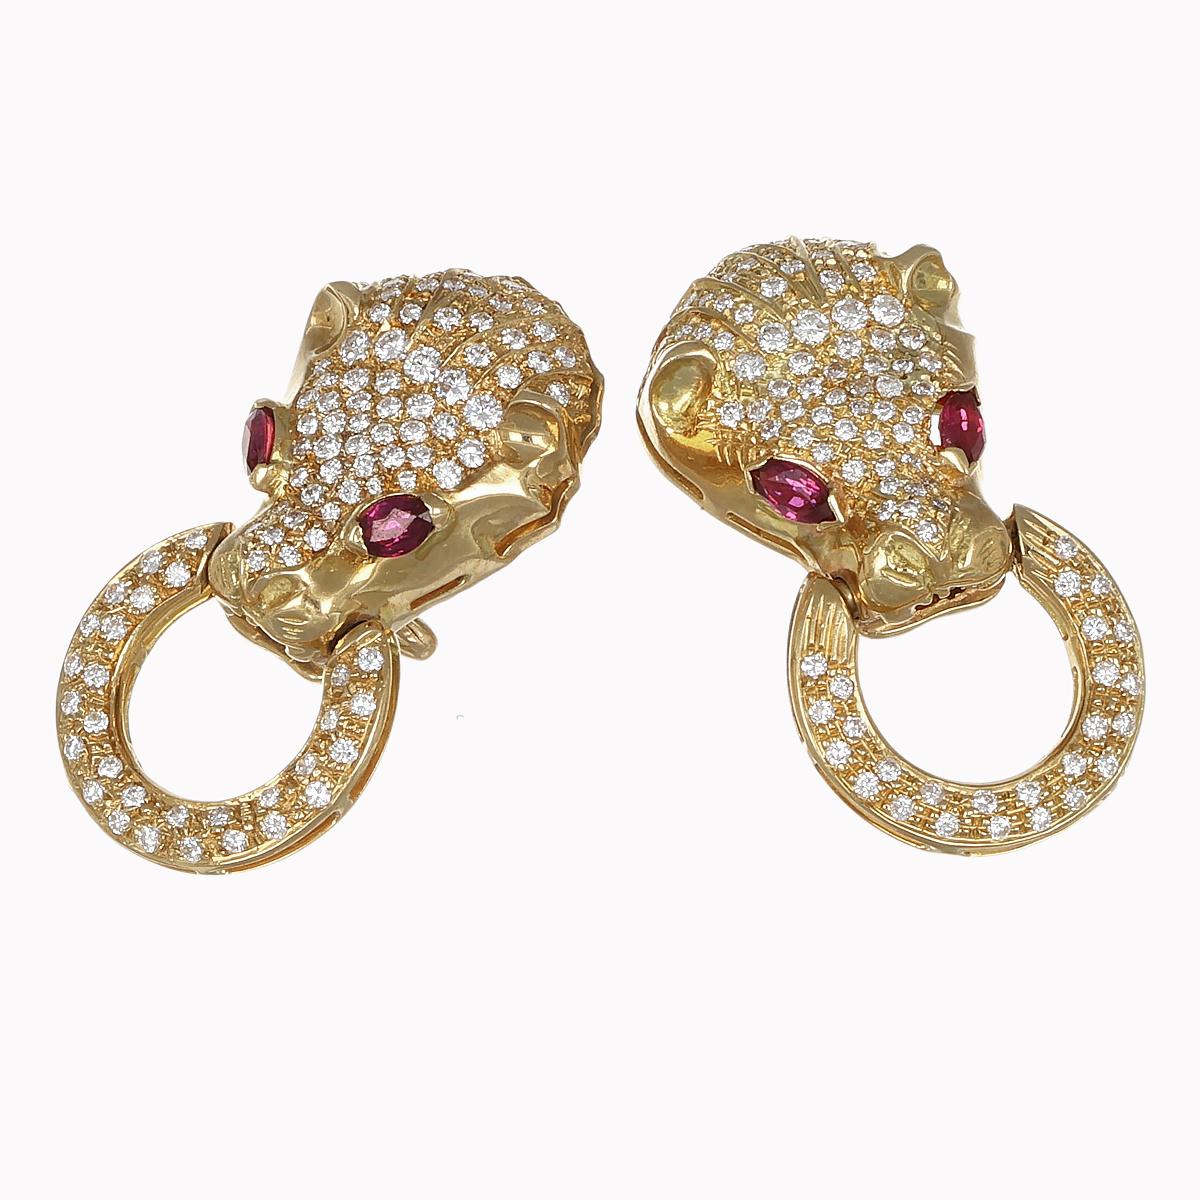 AIG Panther Parure Diamonds 5.79 Ct Marquise Rubies 2 Ct 18Kt Gold Set 3 Pieces For Sale 4